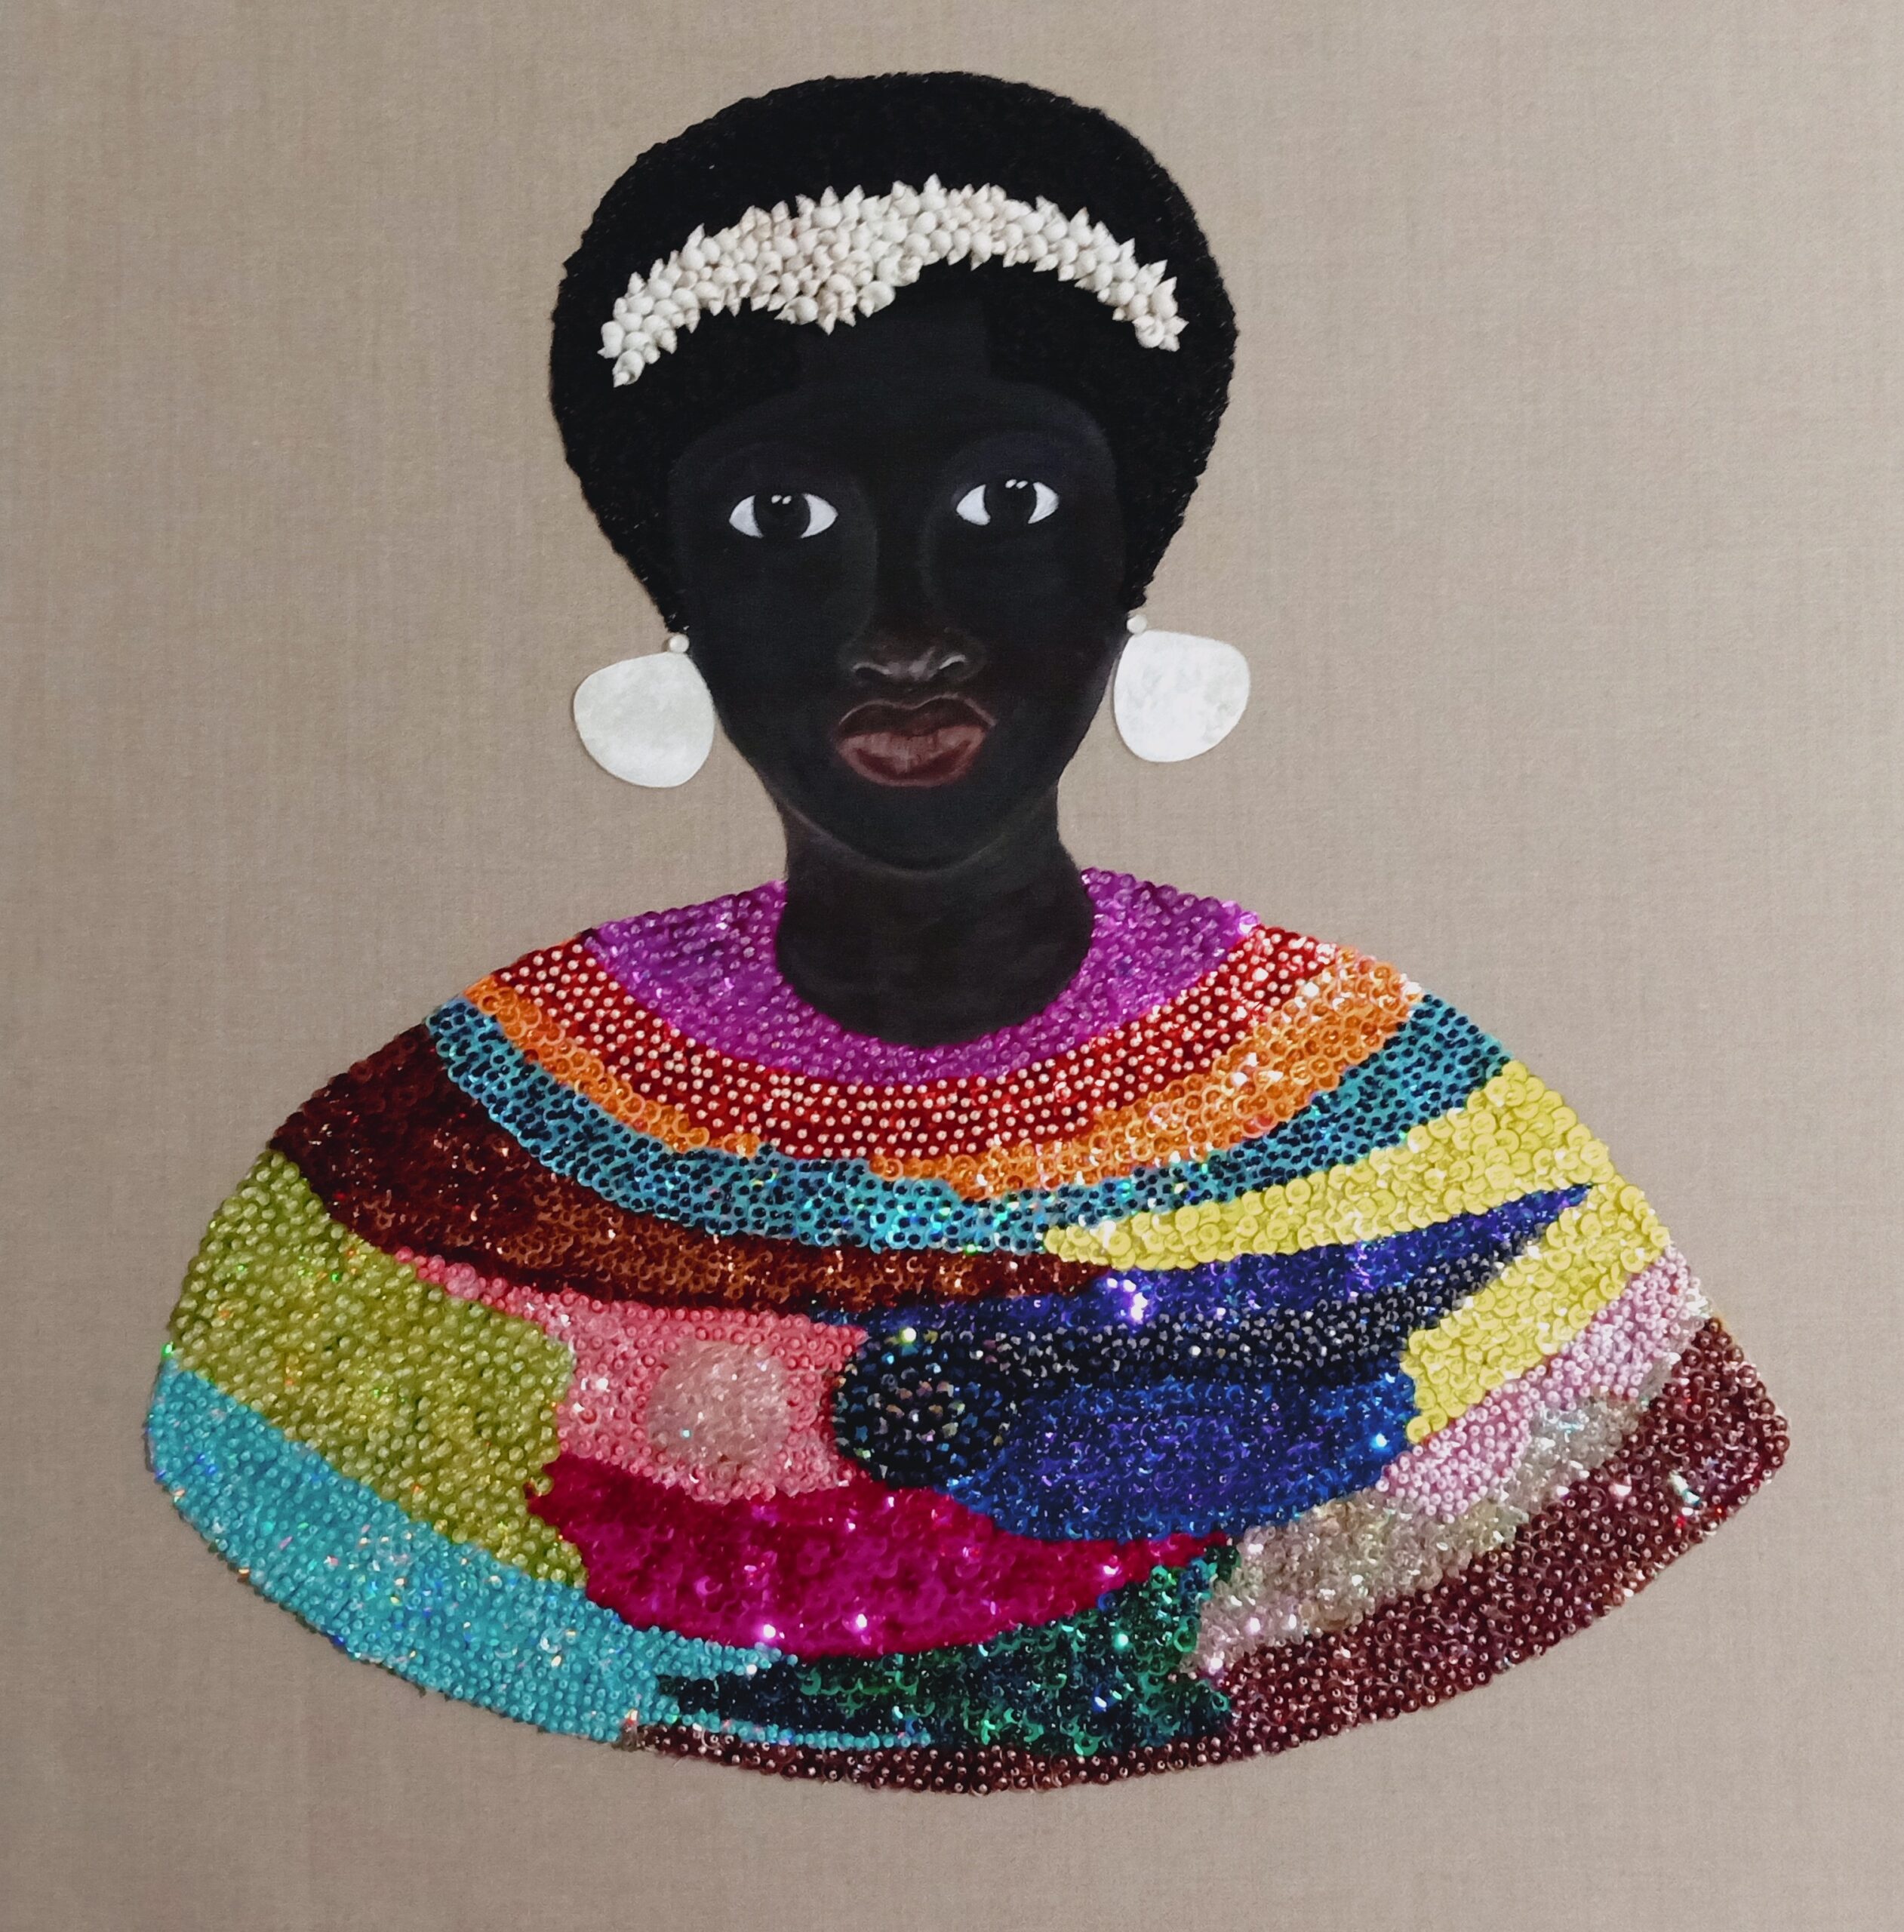 Princess by Candai Bullard at the Spears Gallery